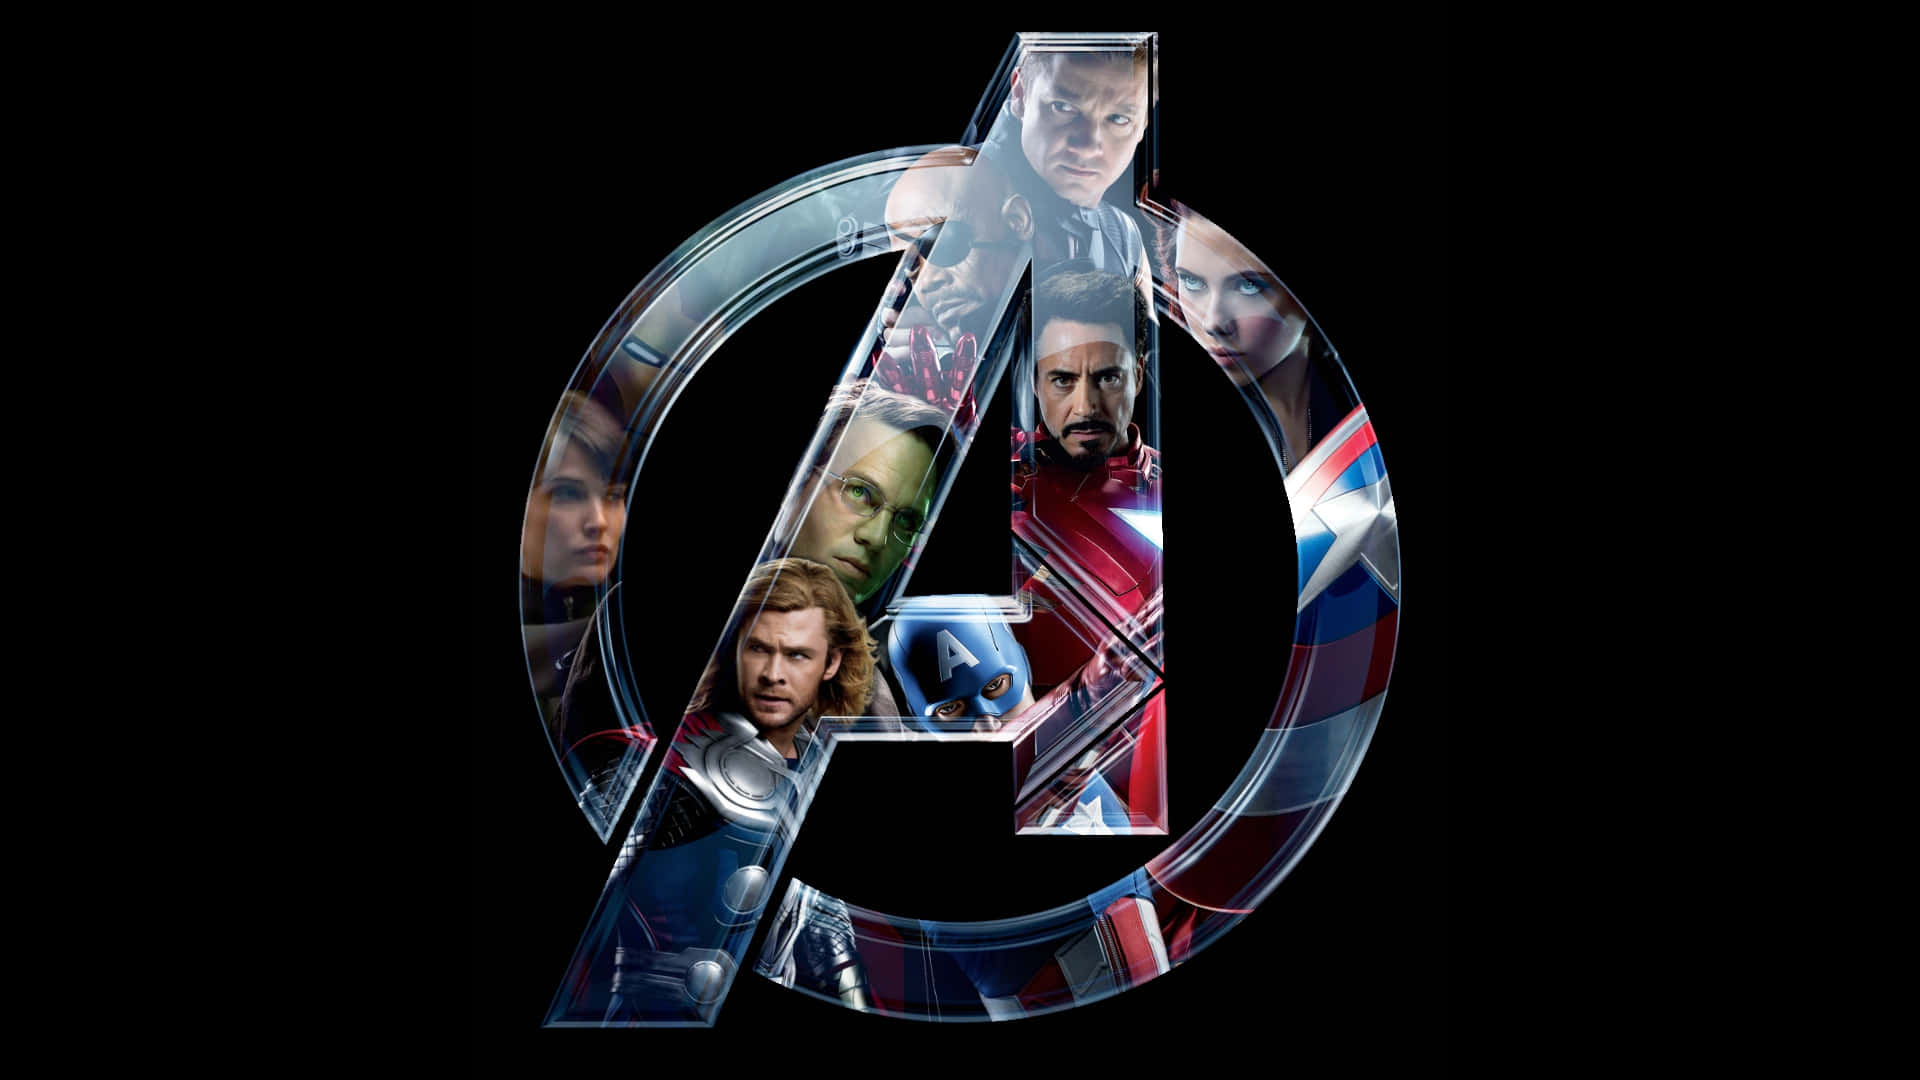 “The Avengers assemble to save the world” Wallpaper